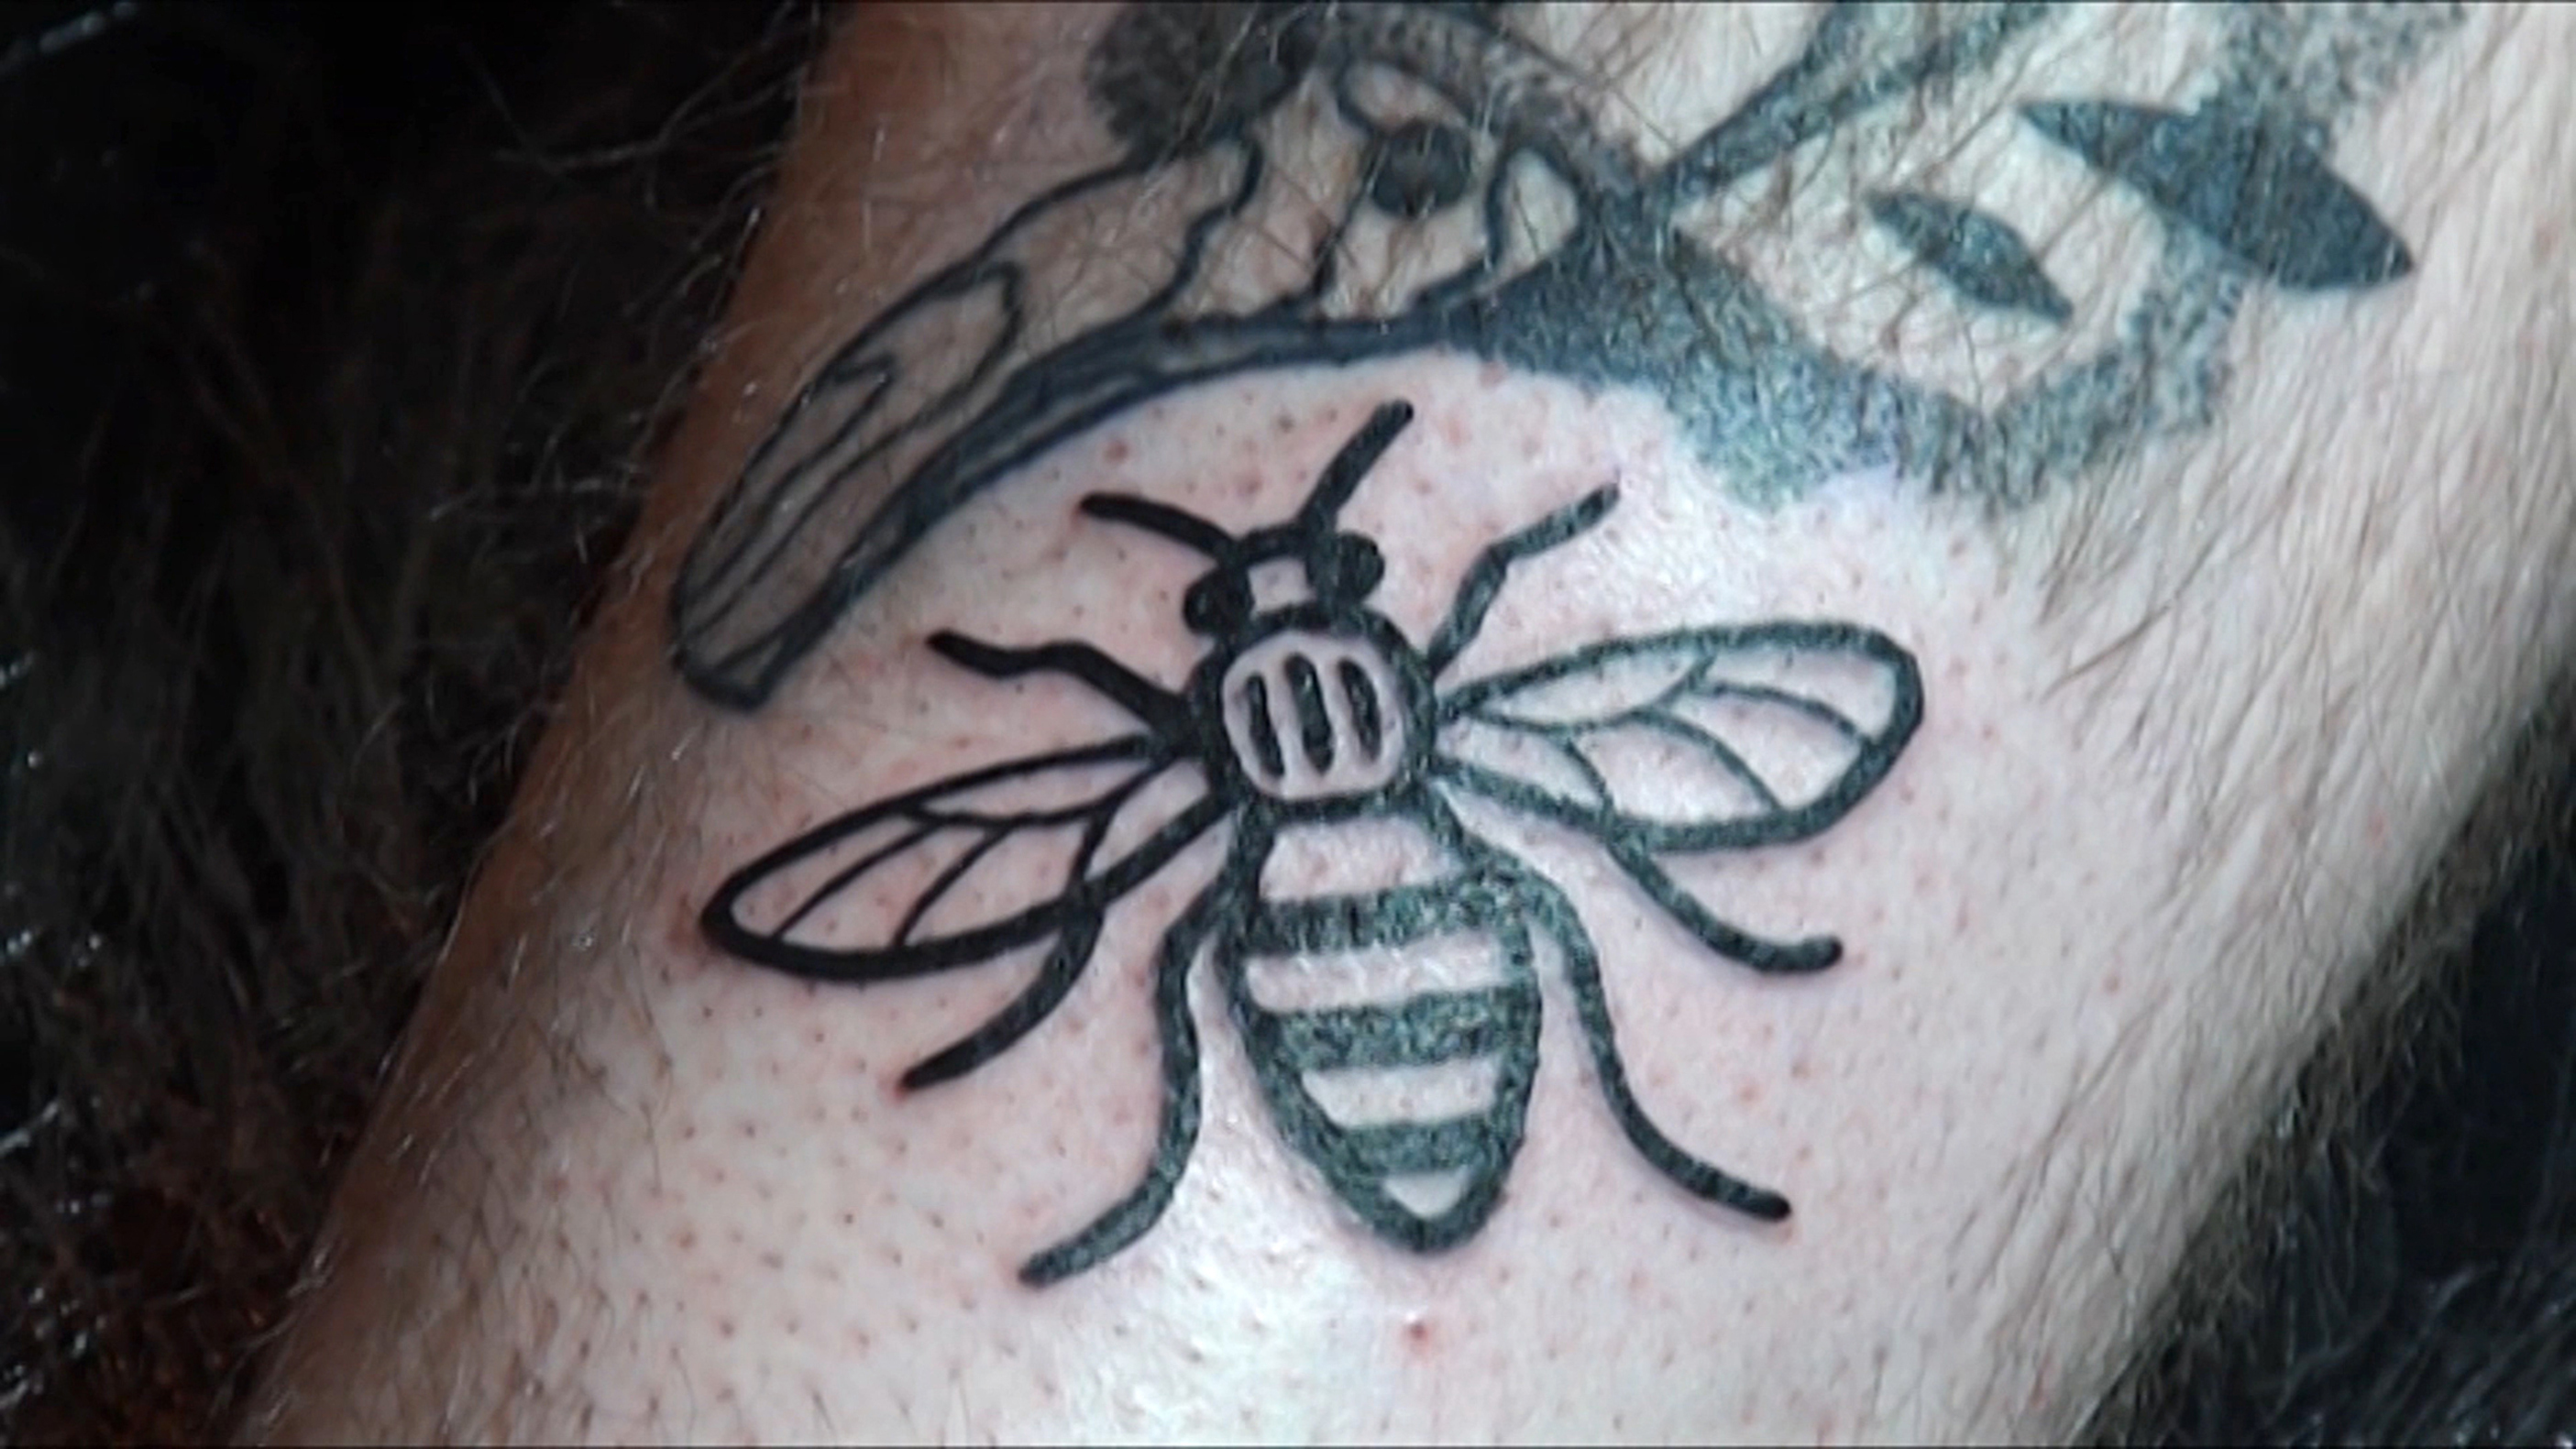 Bumble Bee Tattoo Meaning Exploring the Rich Meanings Infused into Body  Ink  Impeccable Nest